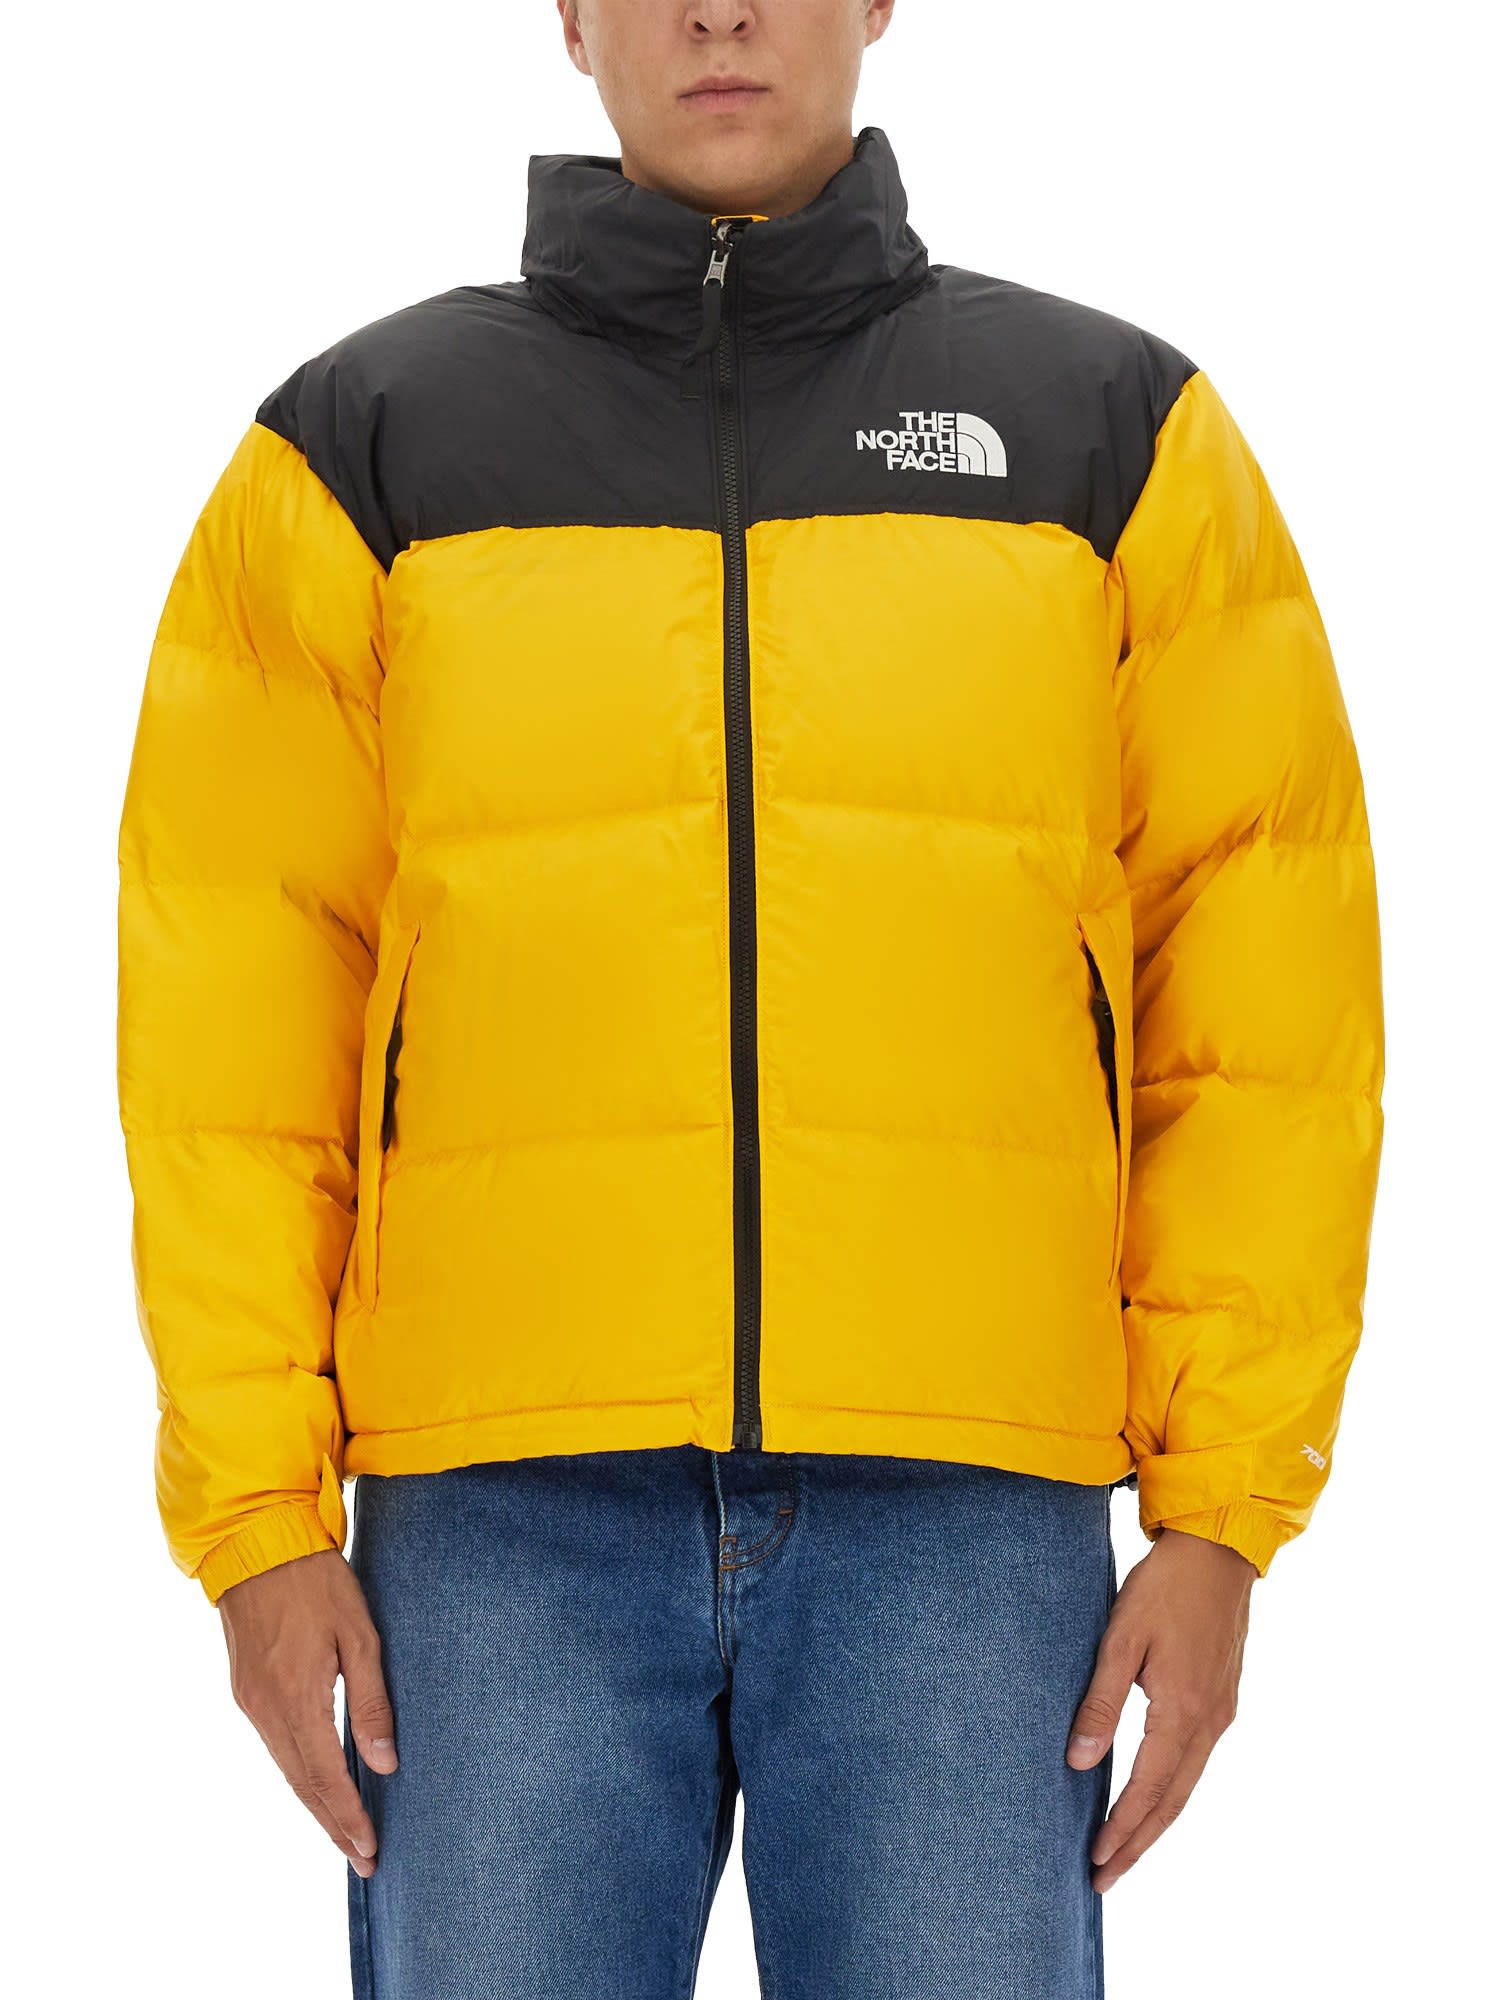 Shop The North Face 1996 Nylon Down Jacket In Gold/black